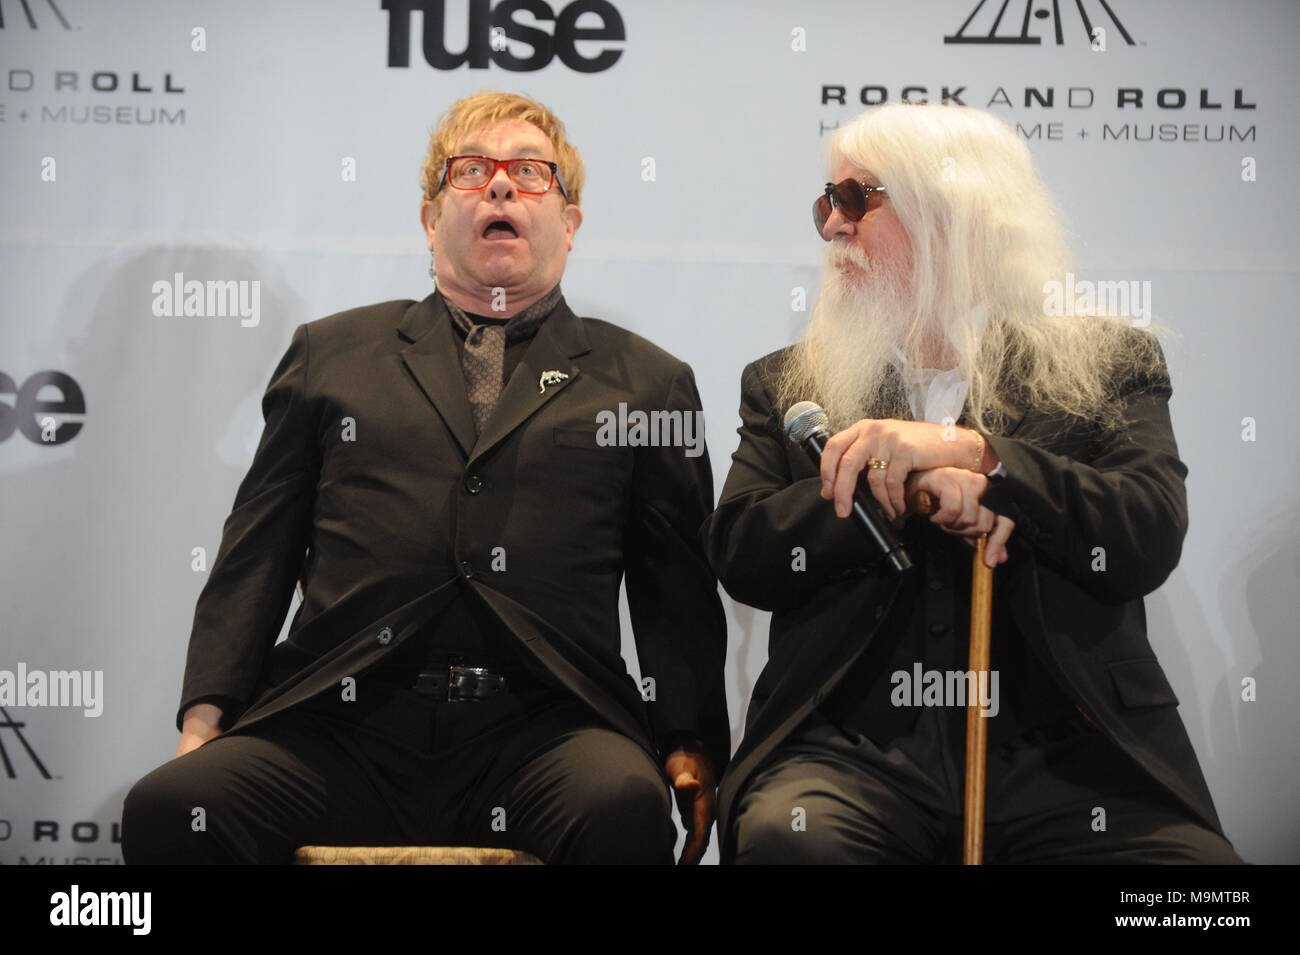 NEW YORK, NY - MARCH 14: Elton John Leon Russell  at the 26th annual Rock and Roll Hall of Fame Induction Ceremony at The Waldorf Astoria on March 14, 2011 in New York City   People:  Elton John Leon Russell Stock Photo